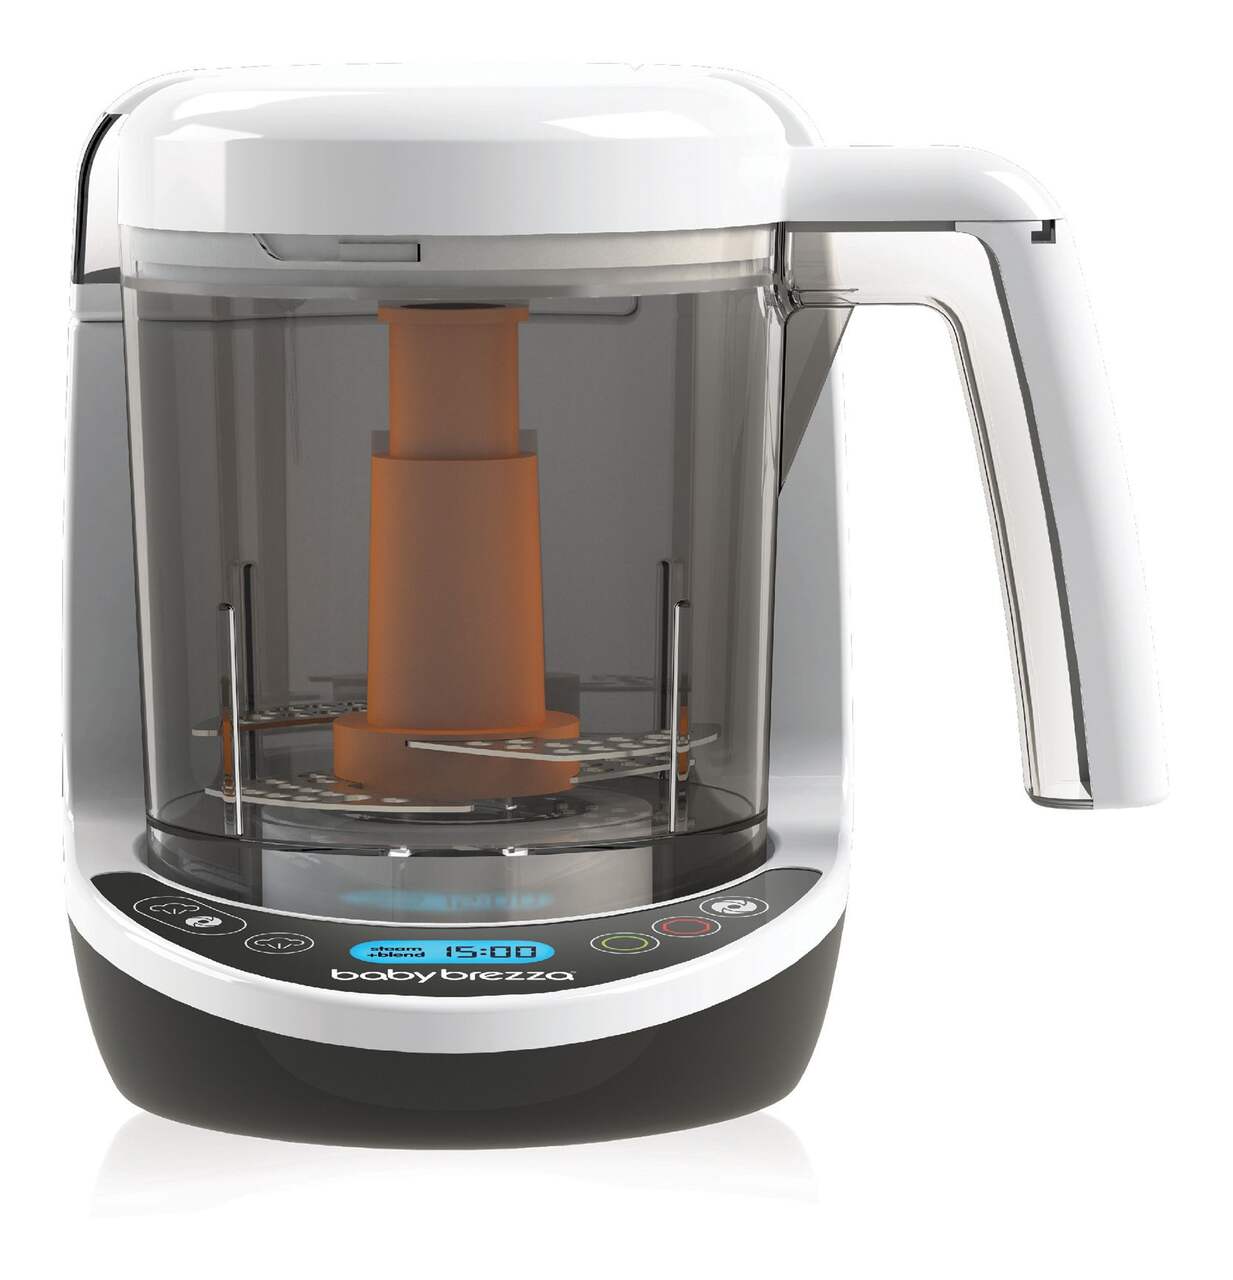 Baby Brezza® One Step™ Food Maker Deluxe